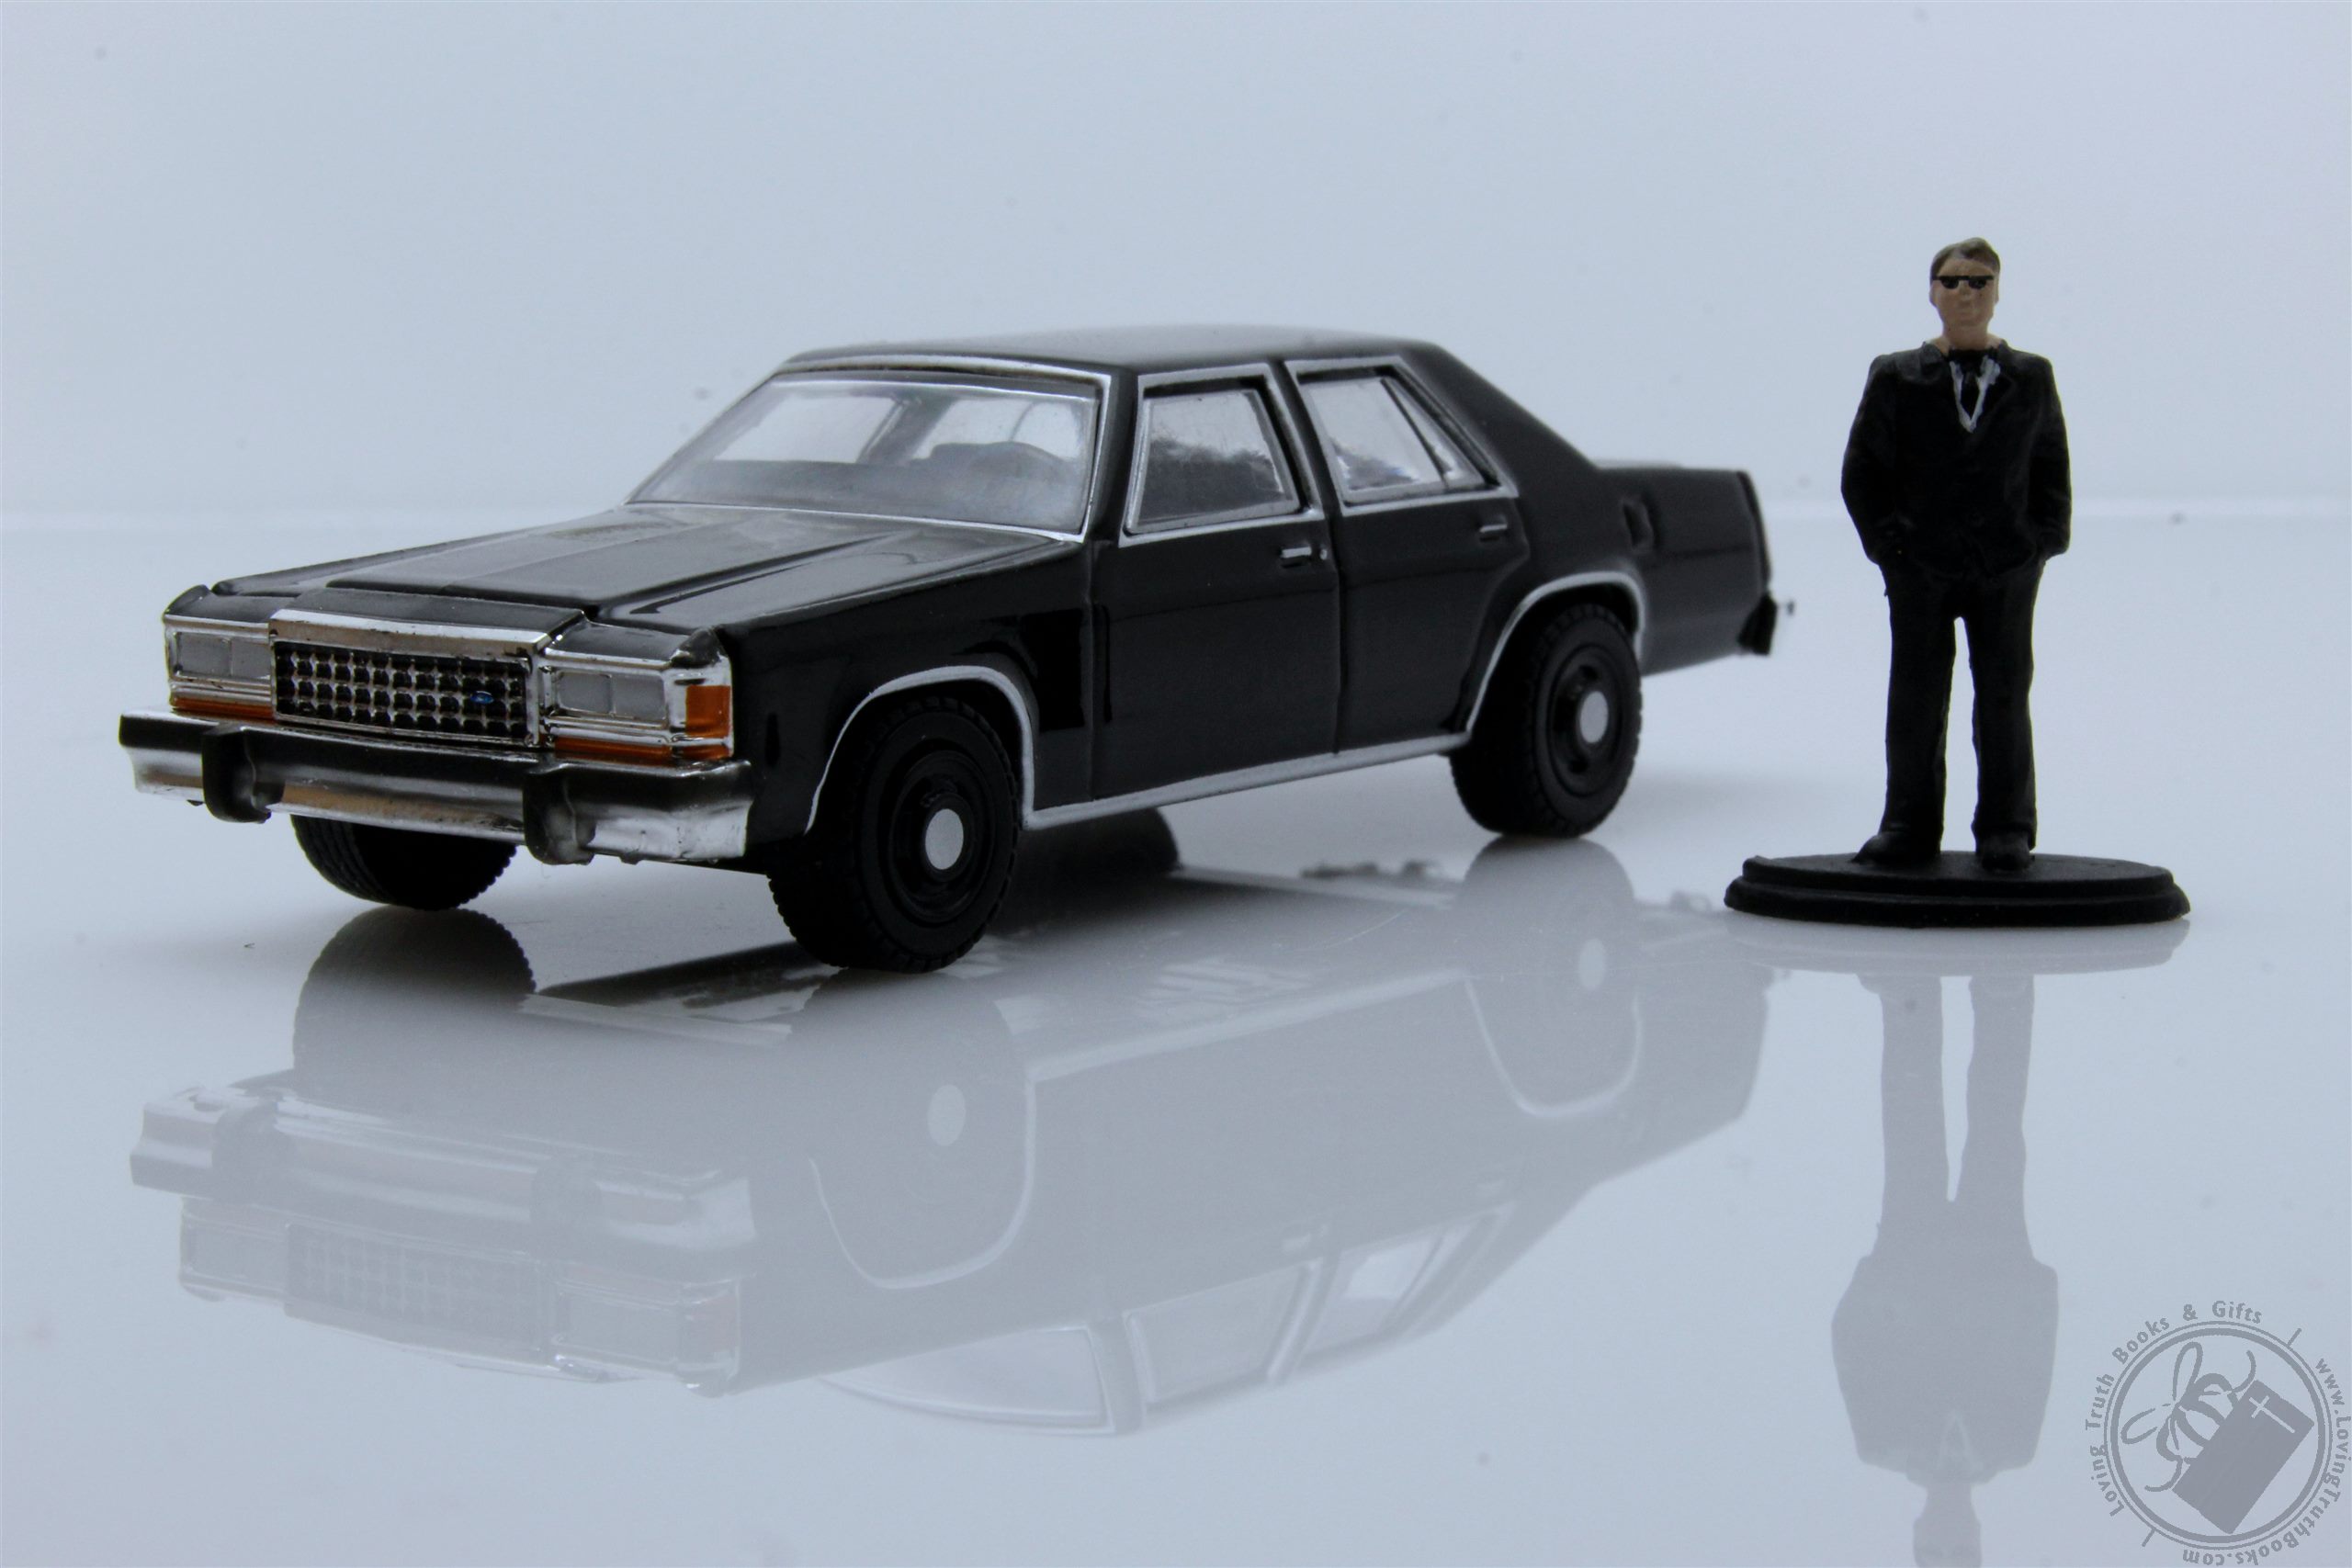 2021 GREENLIGHT 1987 FORD LTD CROWN VICTORIA WITH MAN HOBBY SHOP SERIES 10 1:64